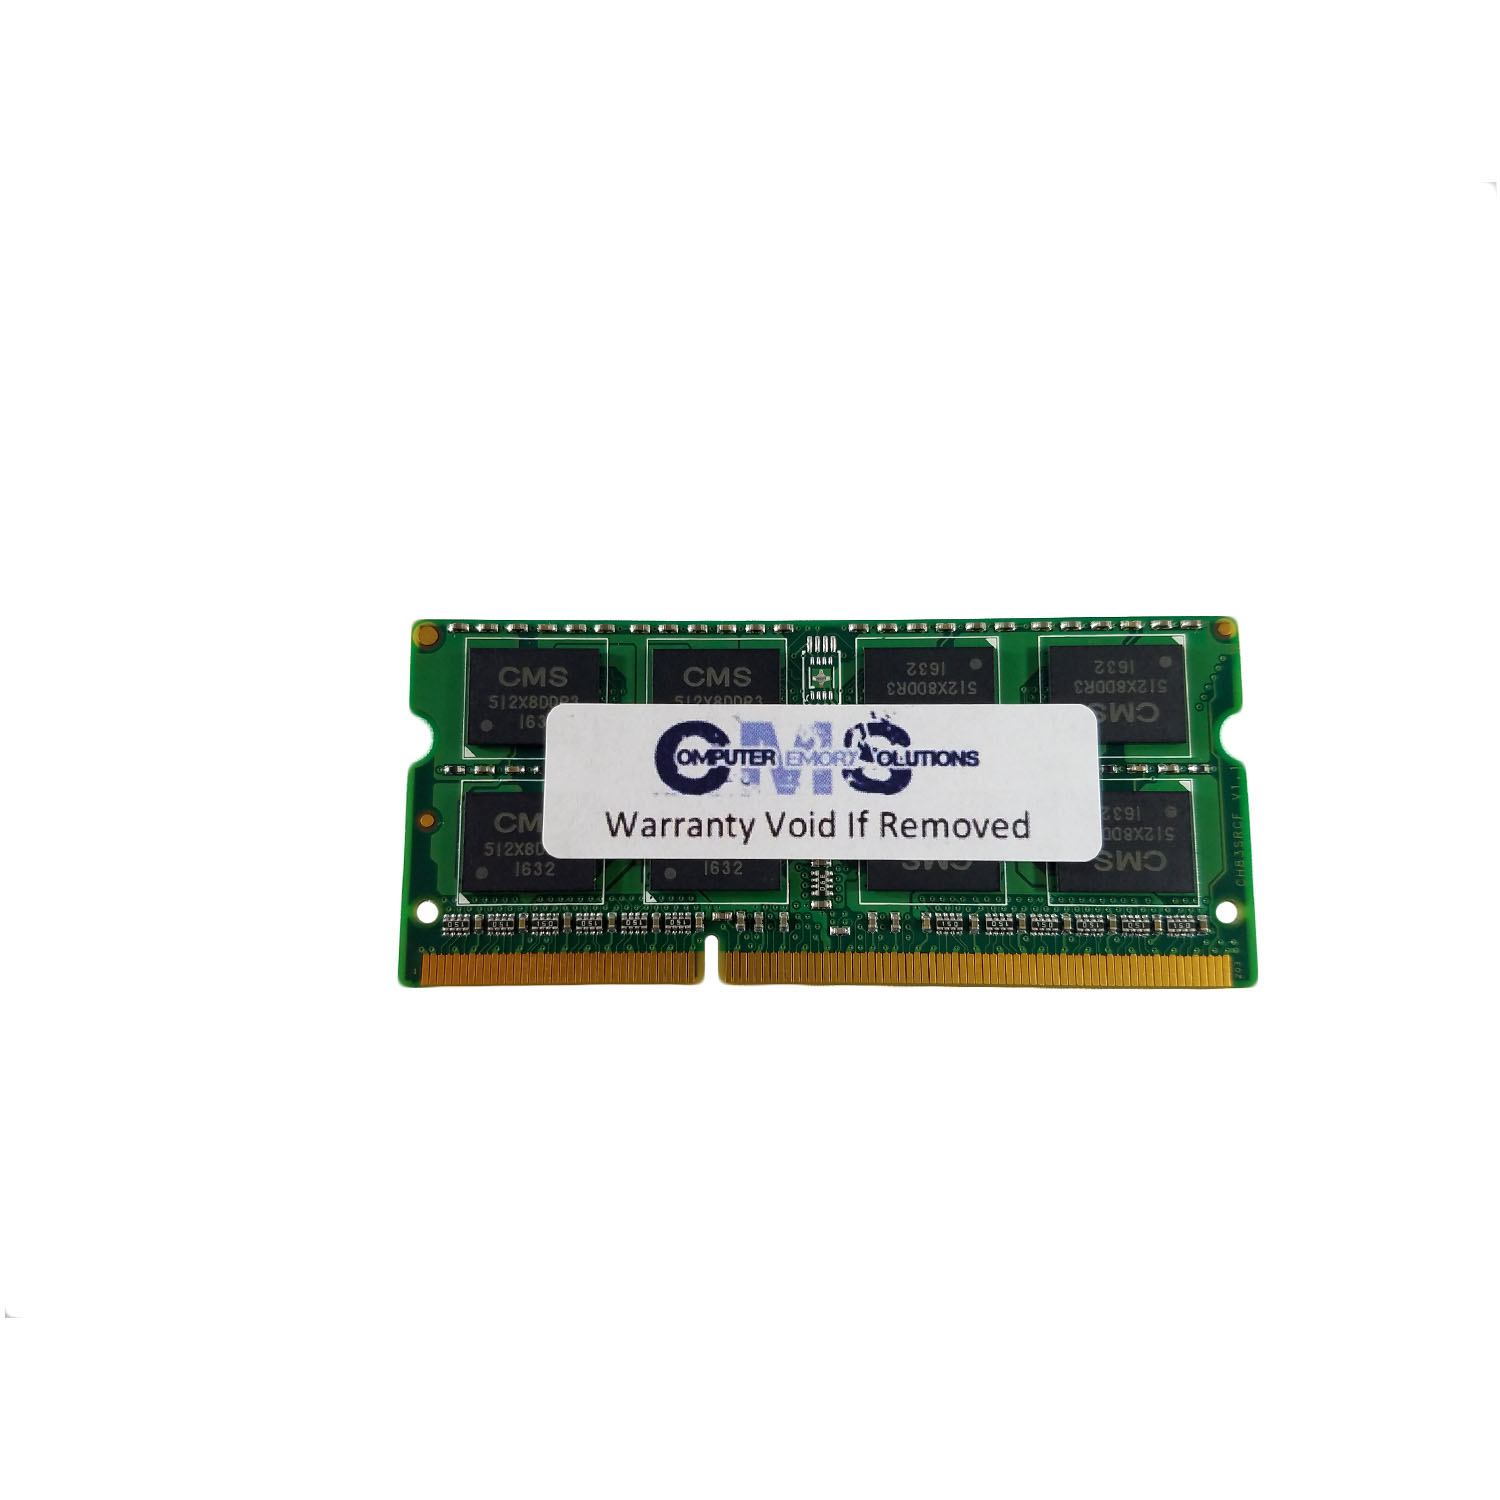 CMS 8GB (1X8GB) DDR3 12800 1600MHz NON ECC SODIMM Memory Ram Upgrade Compatible with Panasonic® Toughbook 52 Mk5 Cf-52 Cf-52S Cf-52T, Cf-52V - A9 - image 1 of 3